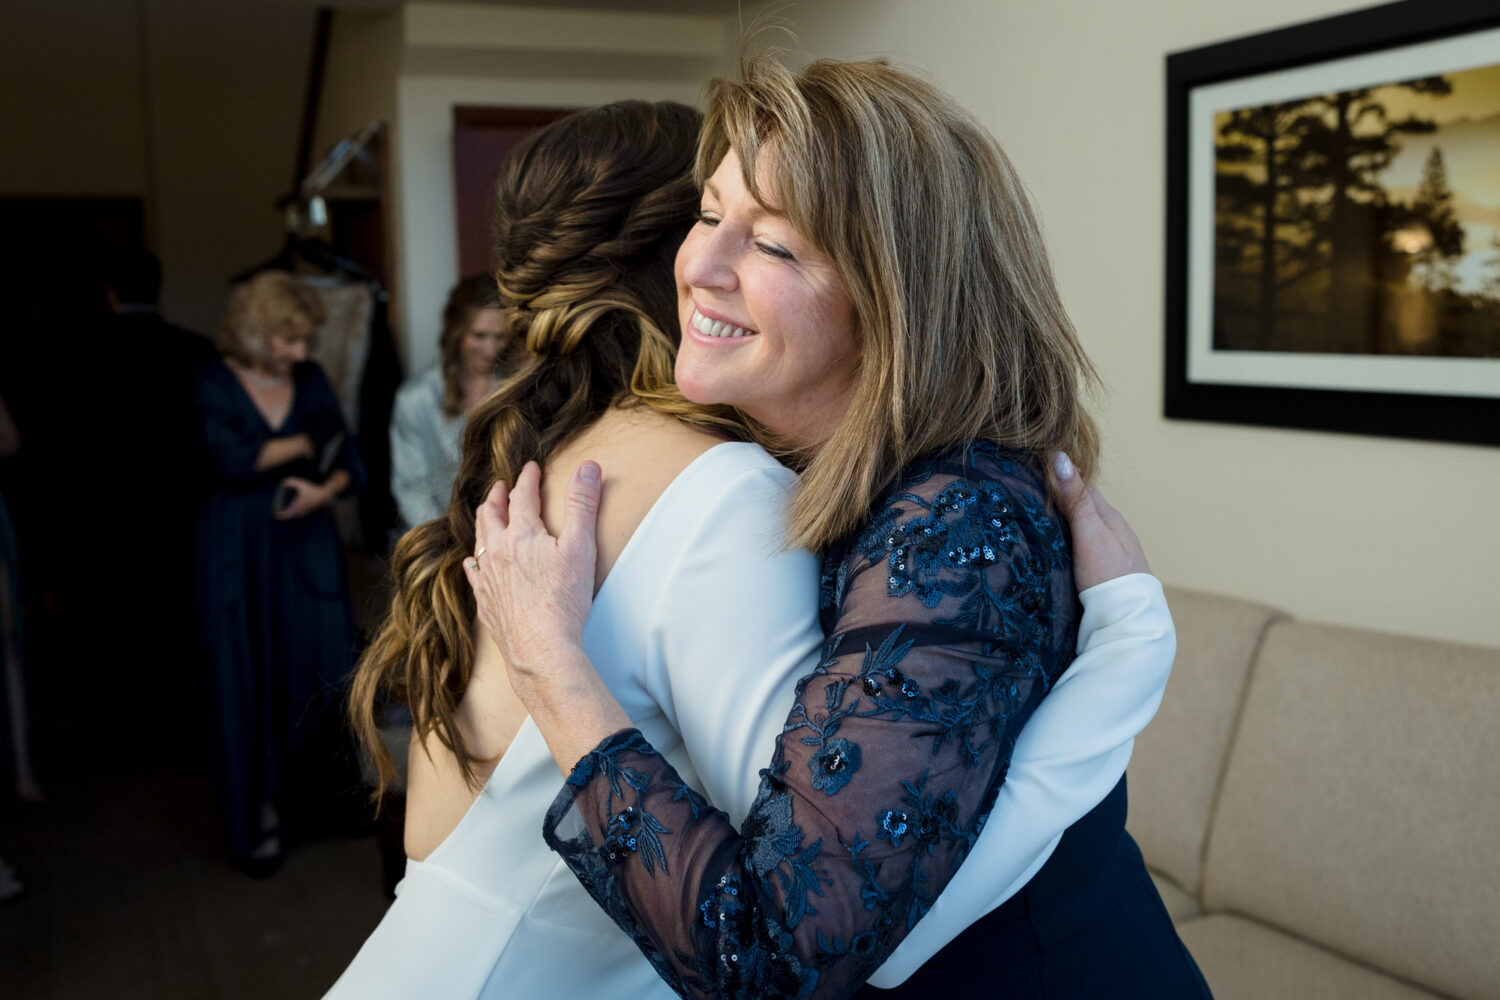 The bride and her mother share a special moment in an Everline Resort hotel room.